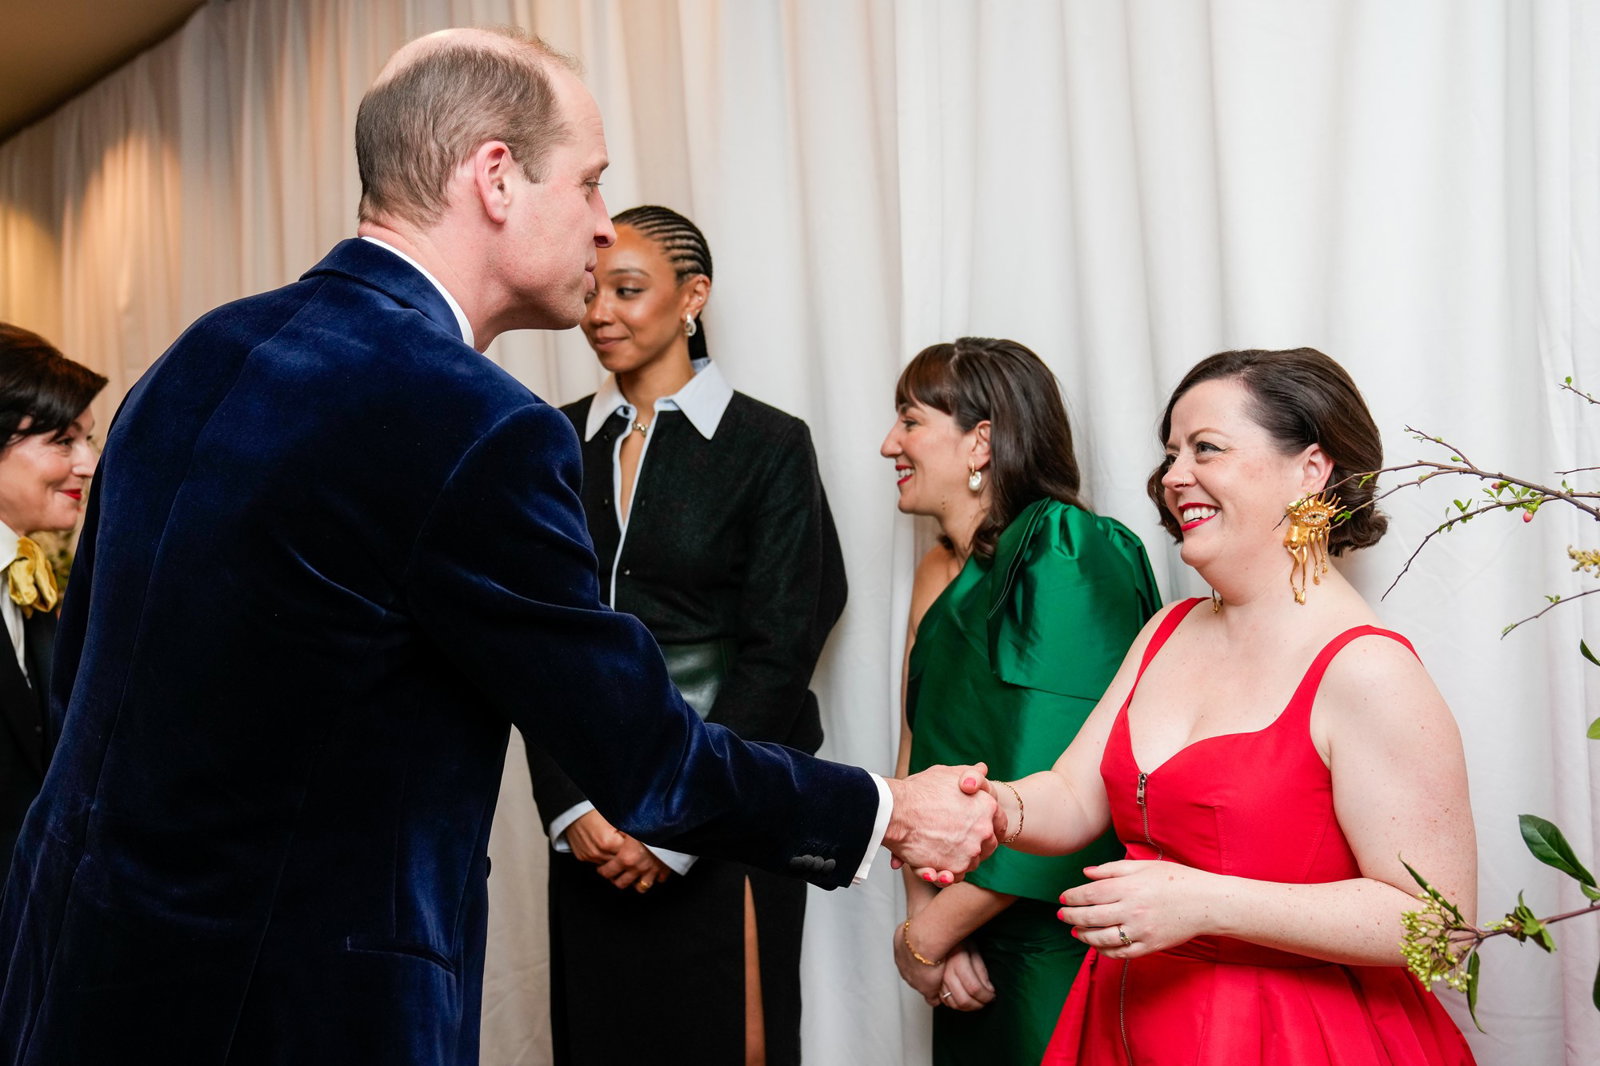 A woman in a red dress shakes hands with prince william